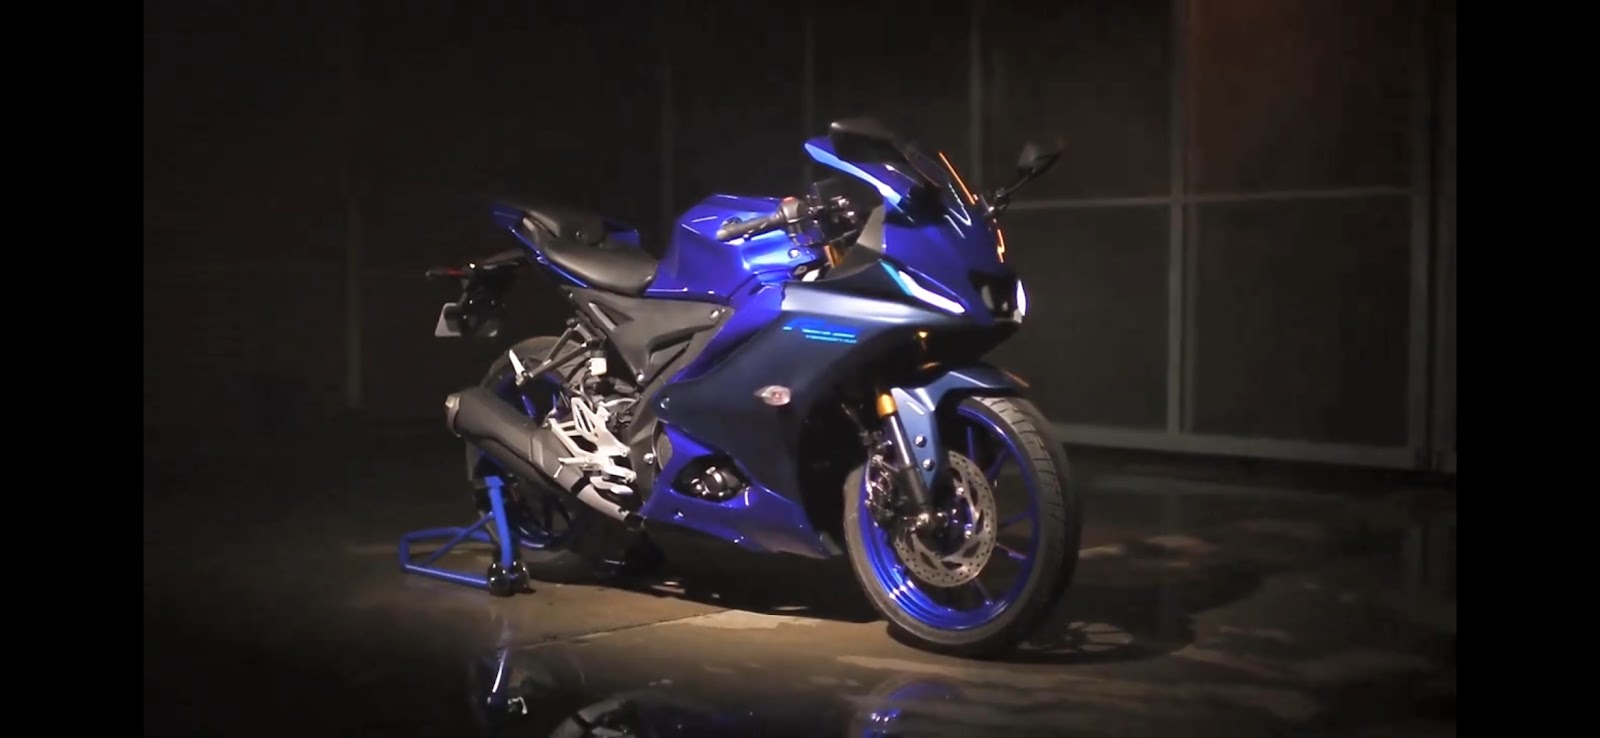 All new Yamaha R15M and R14 V4 image leaked